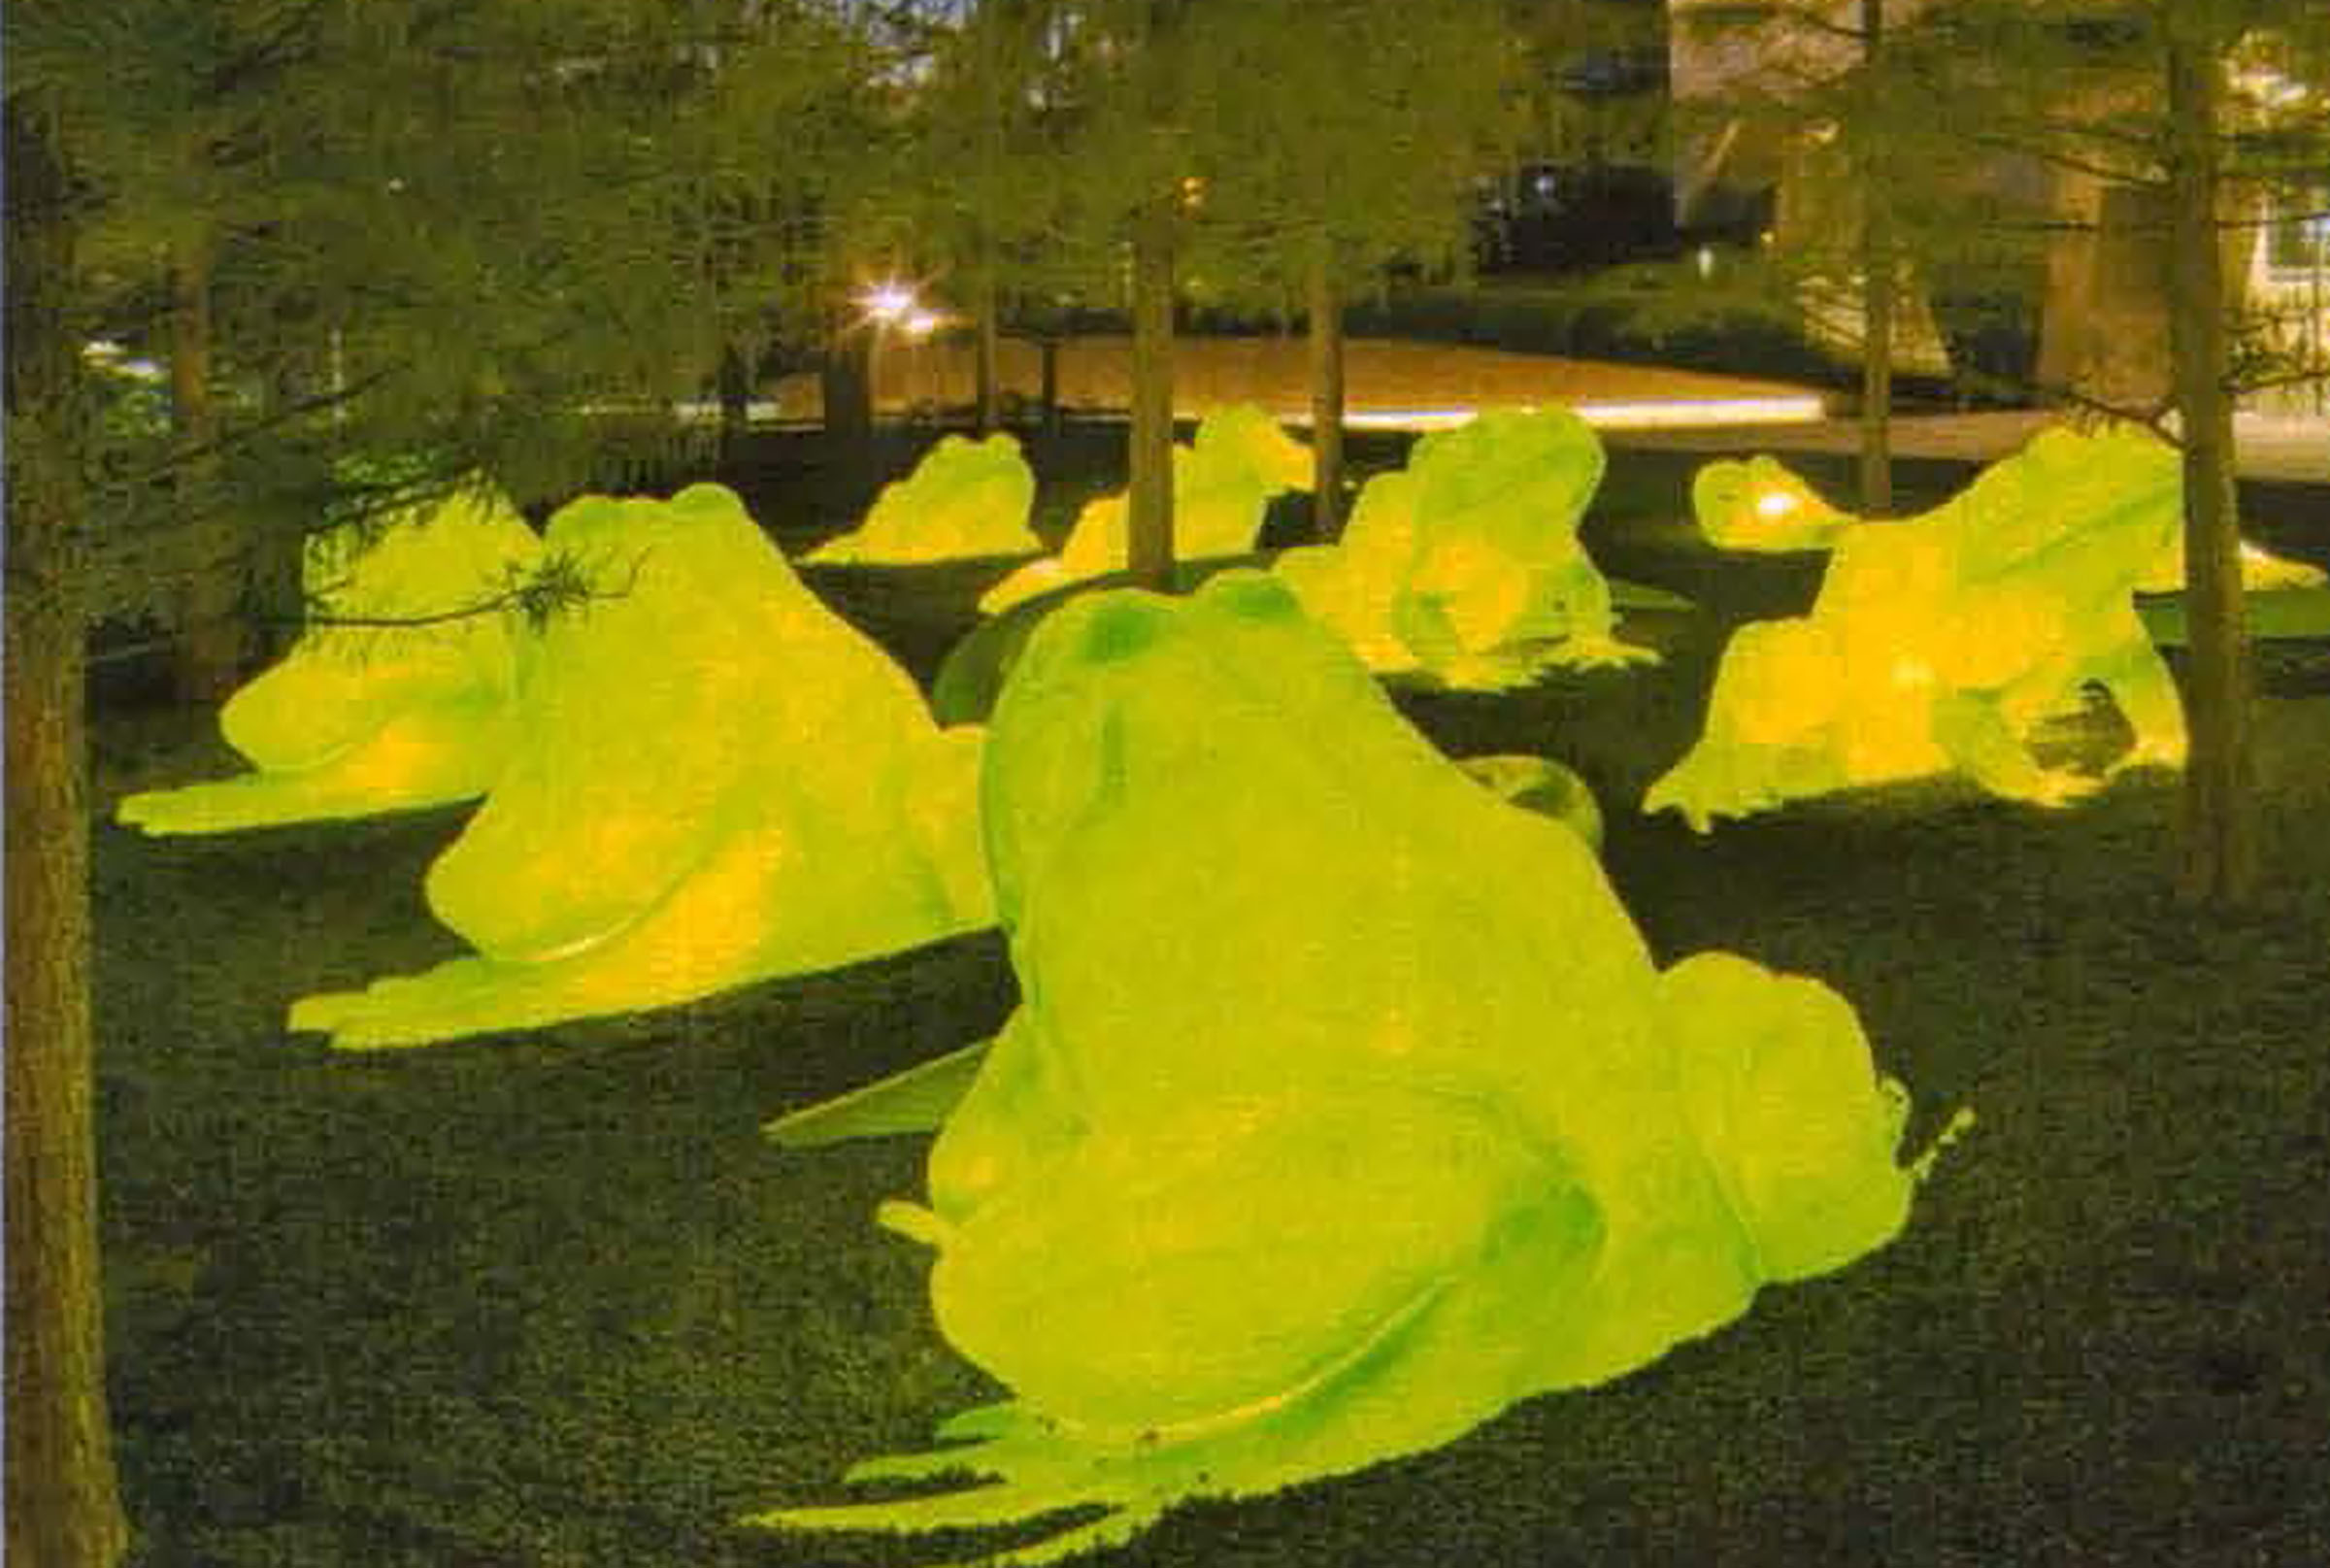 Numerous glowing leap frog displays on museum grounds